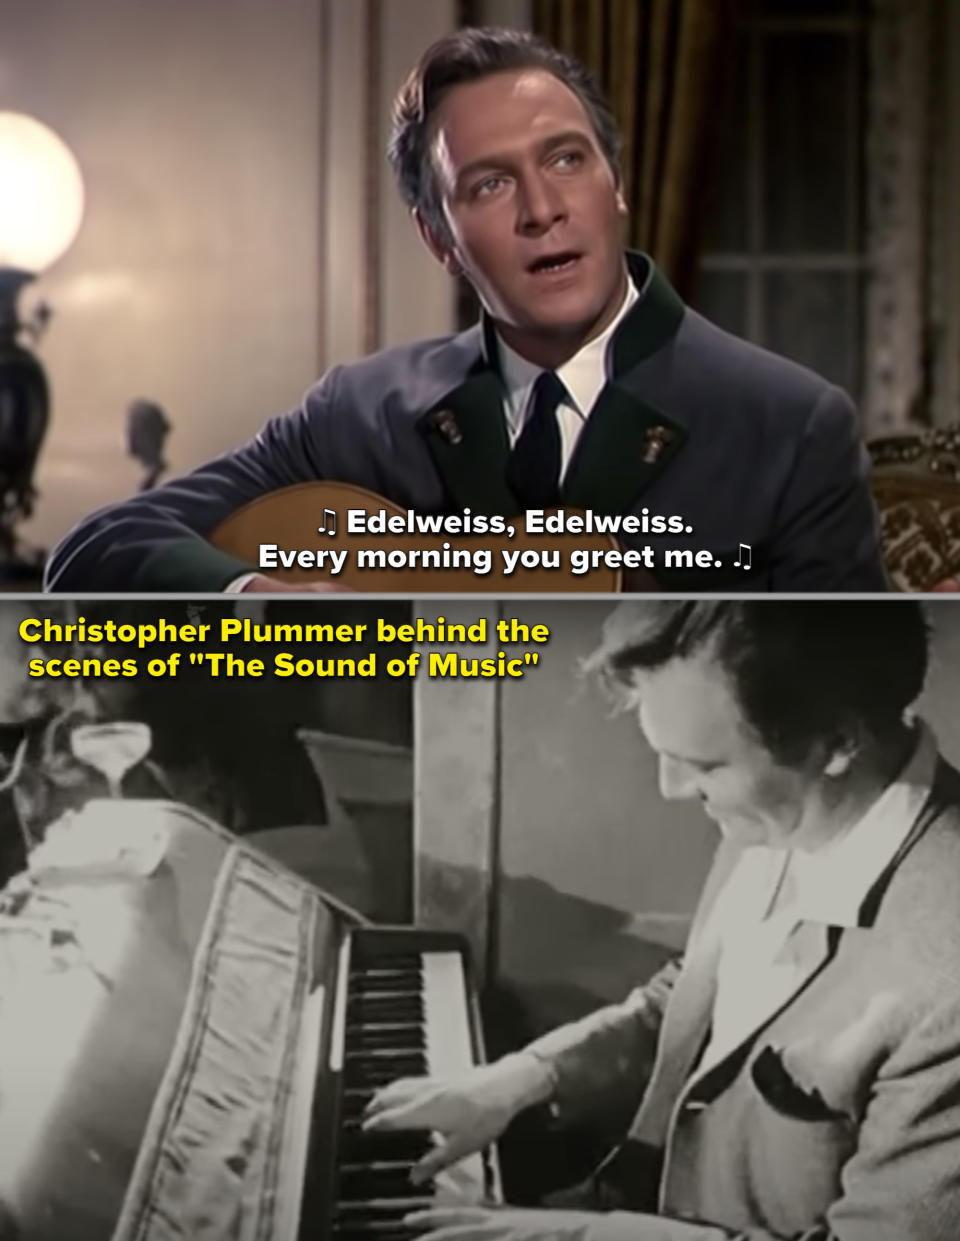 Christopher Plummer playing the guitar and piano